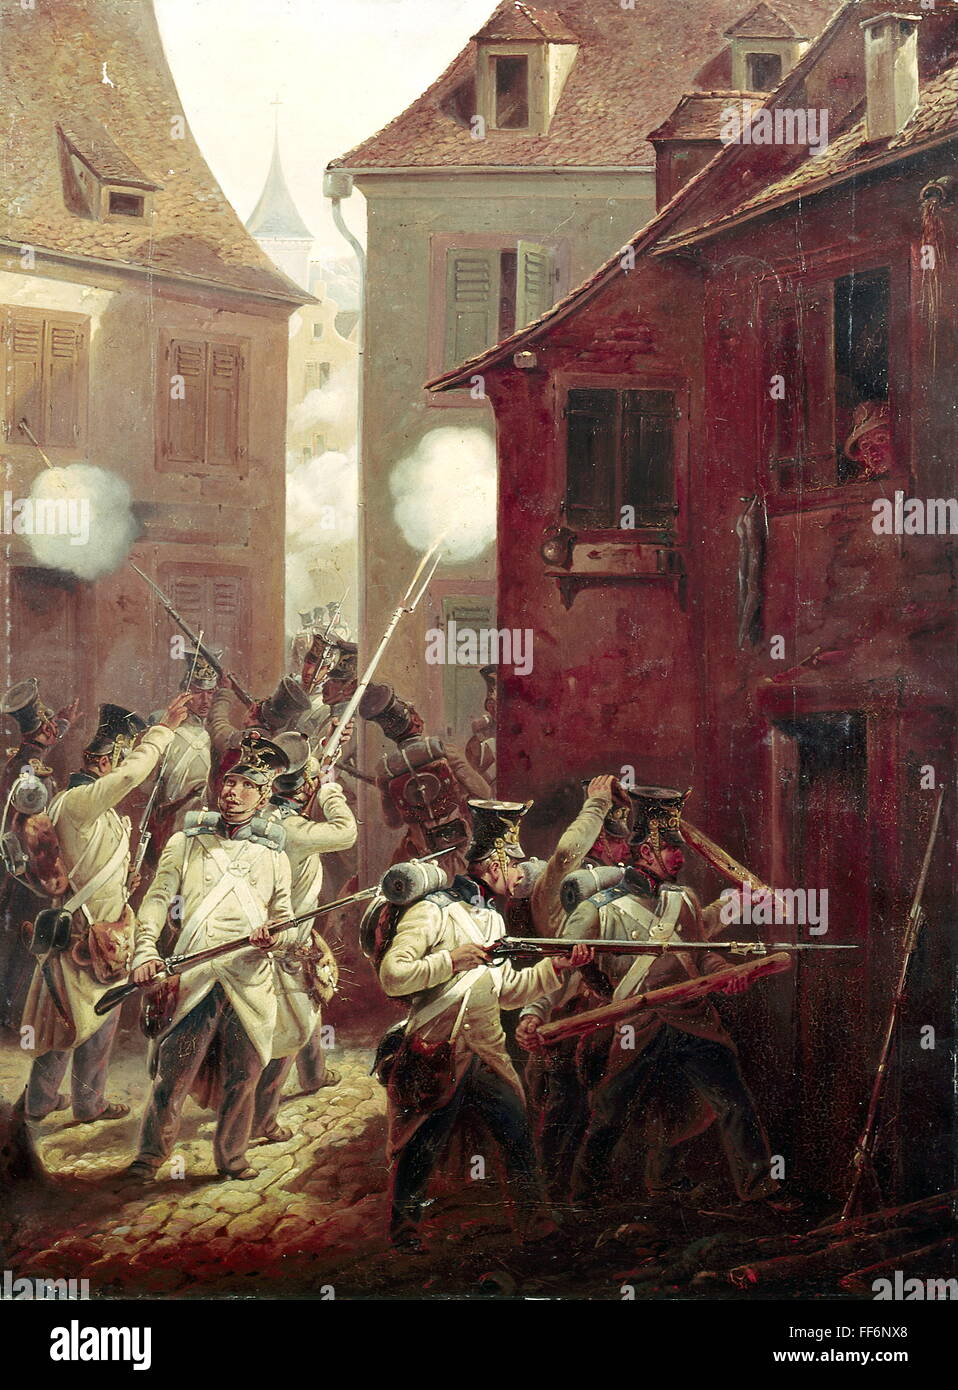 events, revolutions 1848 - 1849, Baden, Staufen, 25.9.1848, Badenese troops fighting against franc-tireurs, painting by Franz Kayser, 19th century, Wehrgeschichtliches Museum, Rastatt, historic, historical, suppression, uprising, governmental troops under General Hoffmann, street fighting, soliders, infantry, military, uniform, shako, coat, weapons, arms, rifle, shooting, firing, equipment, knapsack, kitbag, kit bag, knapsacks, kitbags, kit bags, breaking door open, city, Germany, revolution, people, Additional-Rights-Clearences-Not Available Stock Photo